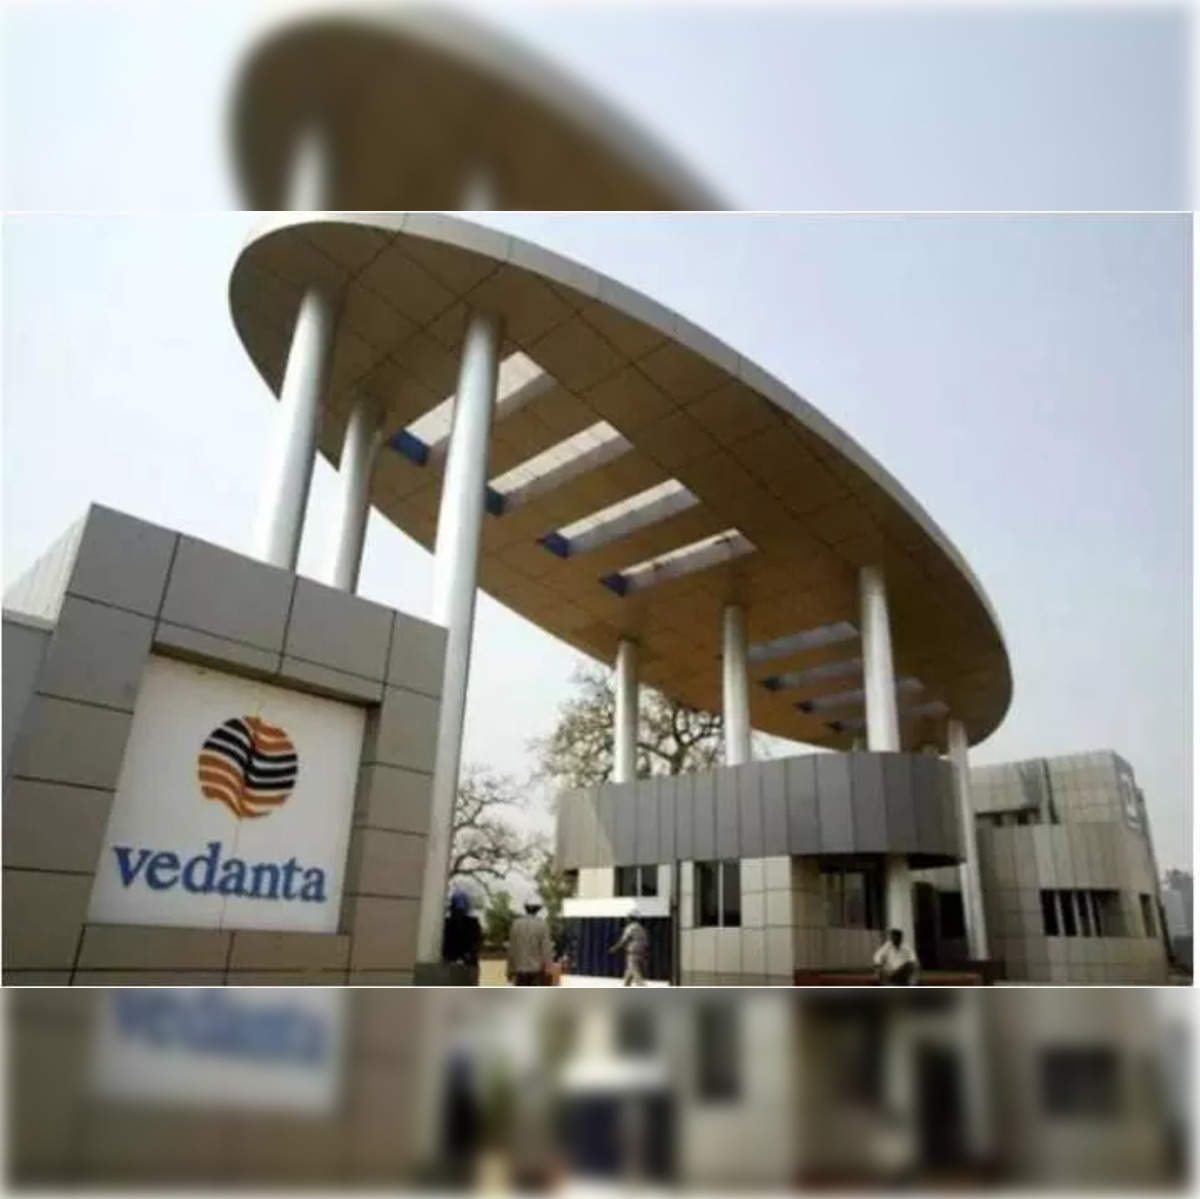 s&p global on vedanta: After Moody's, S&P Global cuts Vedanta Resources'  rating; co placed under 'CreditWatch negative' - The Economic Times